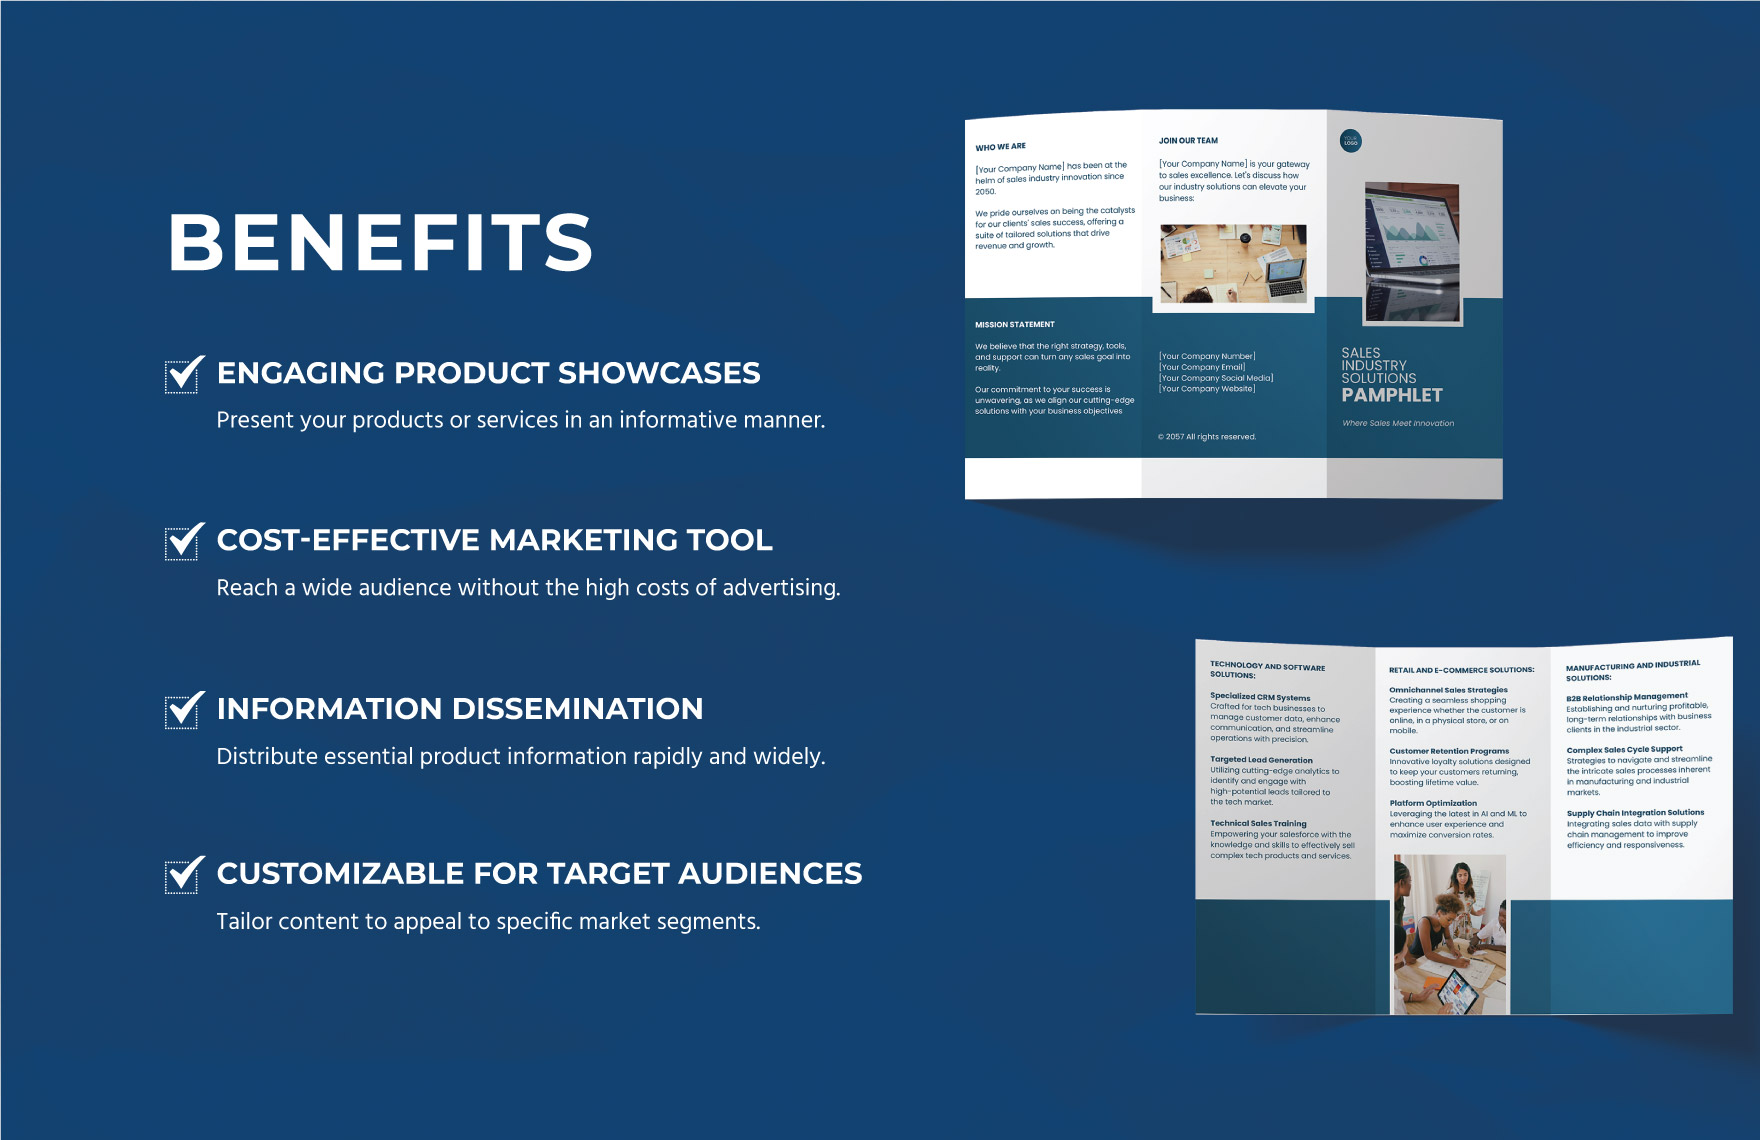 Sales Industry Solutions Pamphlet Template